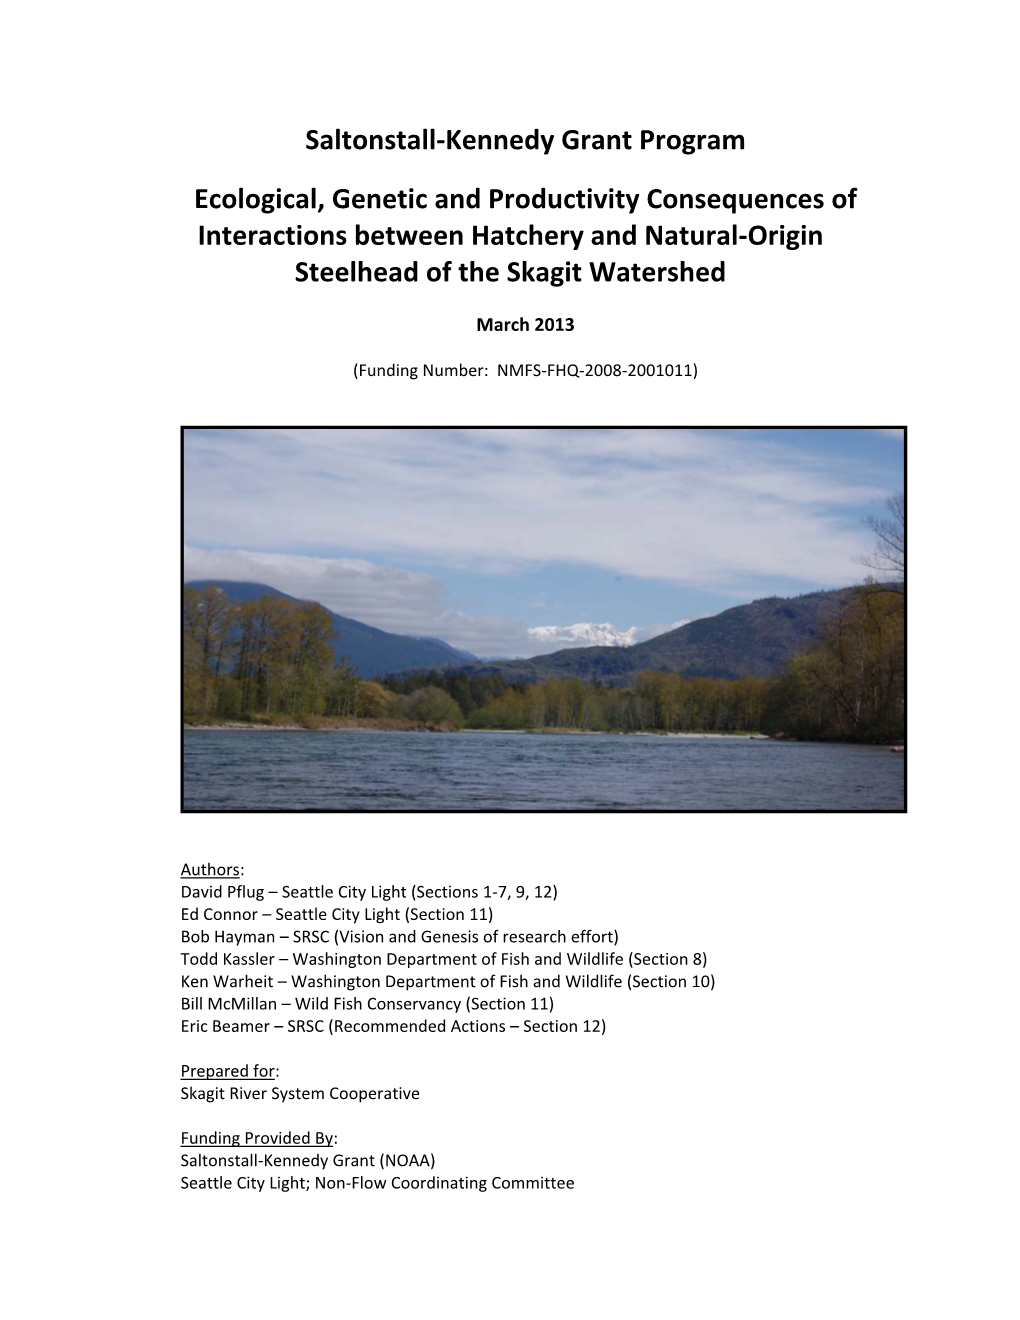 Saltonstall-Kennedy Grant Program Ecological, Genetic and Productivity